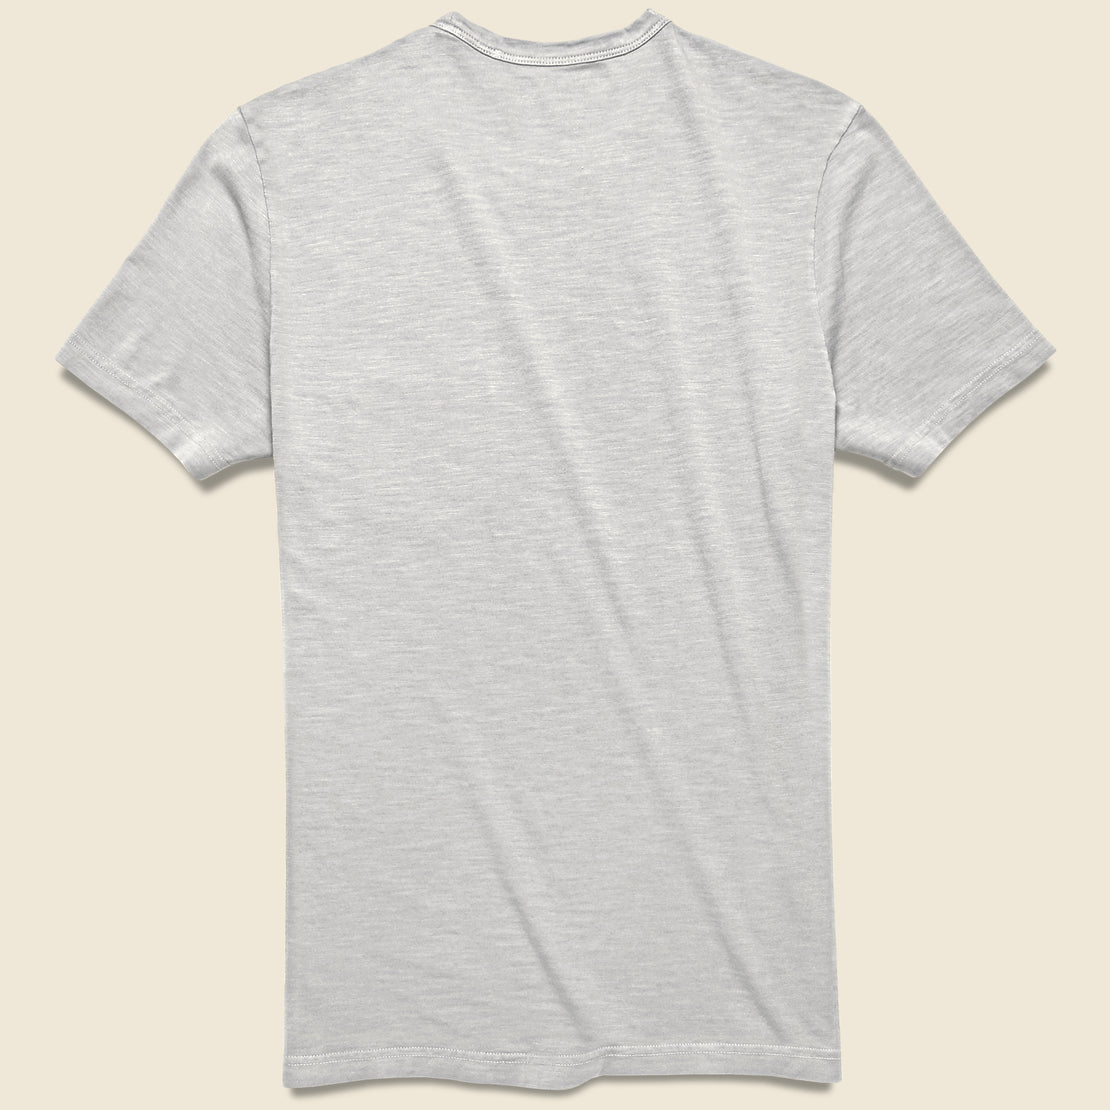 Garment Dyed Pocket Tee - Wind Grey - Faherty - STAG Provisions - Tops - S/S Tee